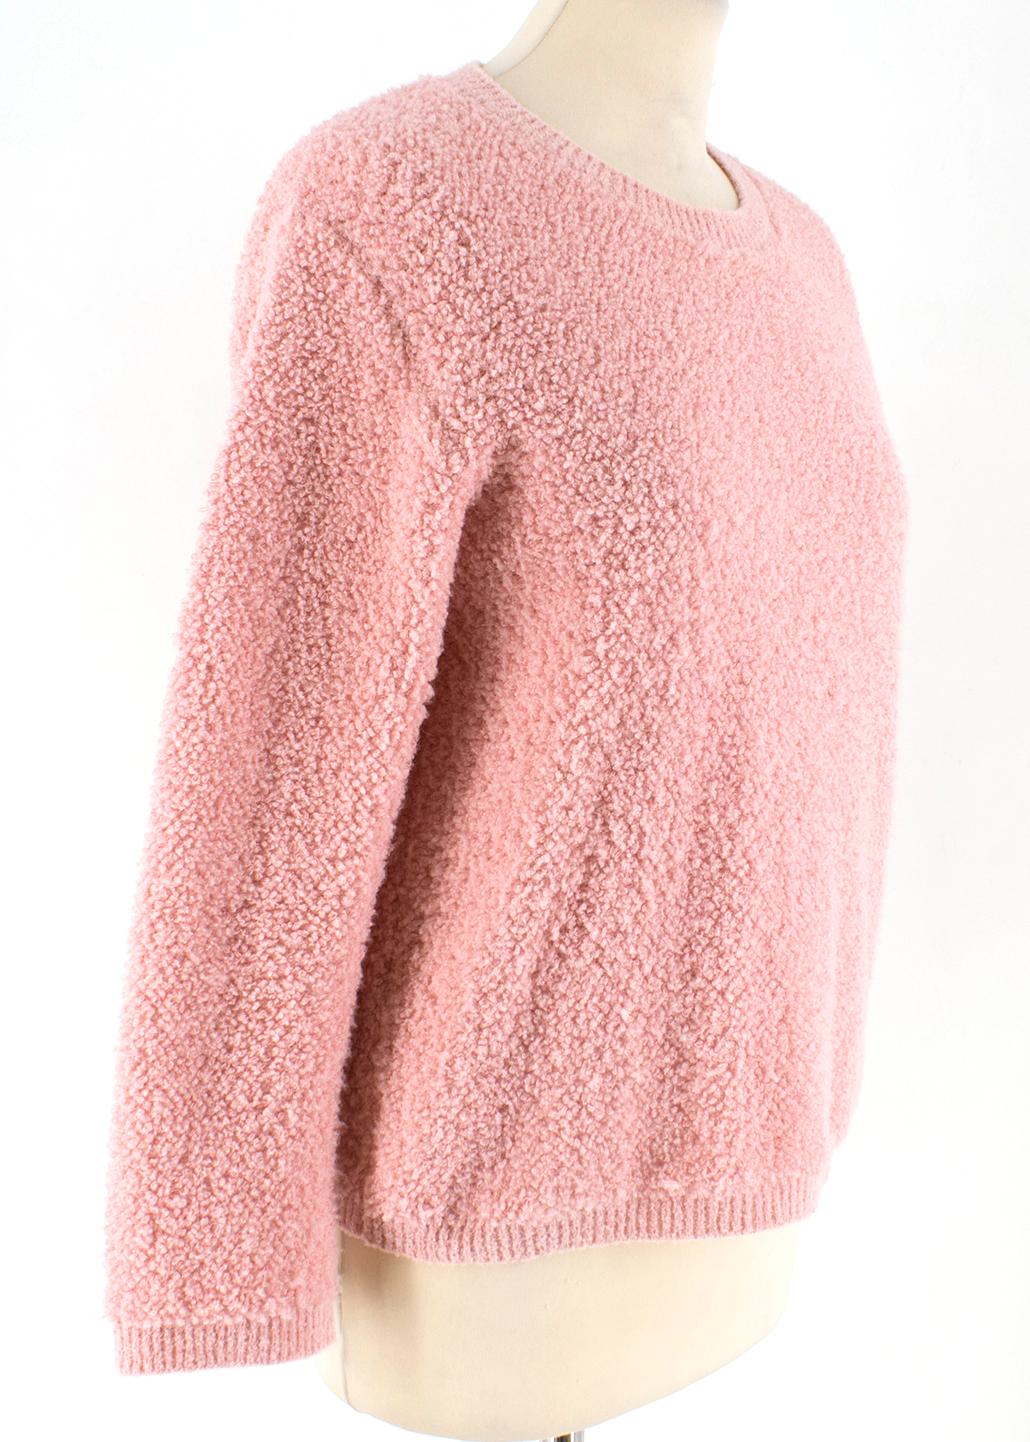 Prada Pink Alpaca-blend boucle sweater. Features a keyhole back with a button fastening and bracelet sleeves.

- Made in Italy 
- 54% Aplaca , 24% Polyamide, 22% Cotton

Shoulders 45 cm
Sleeves 49 cm
Length 55 cm